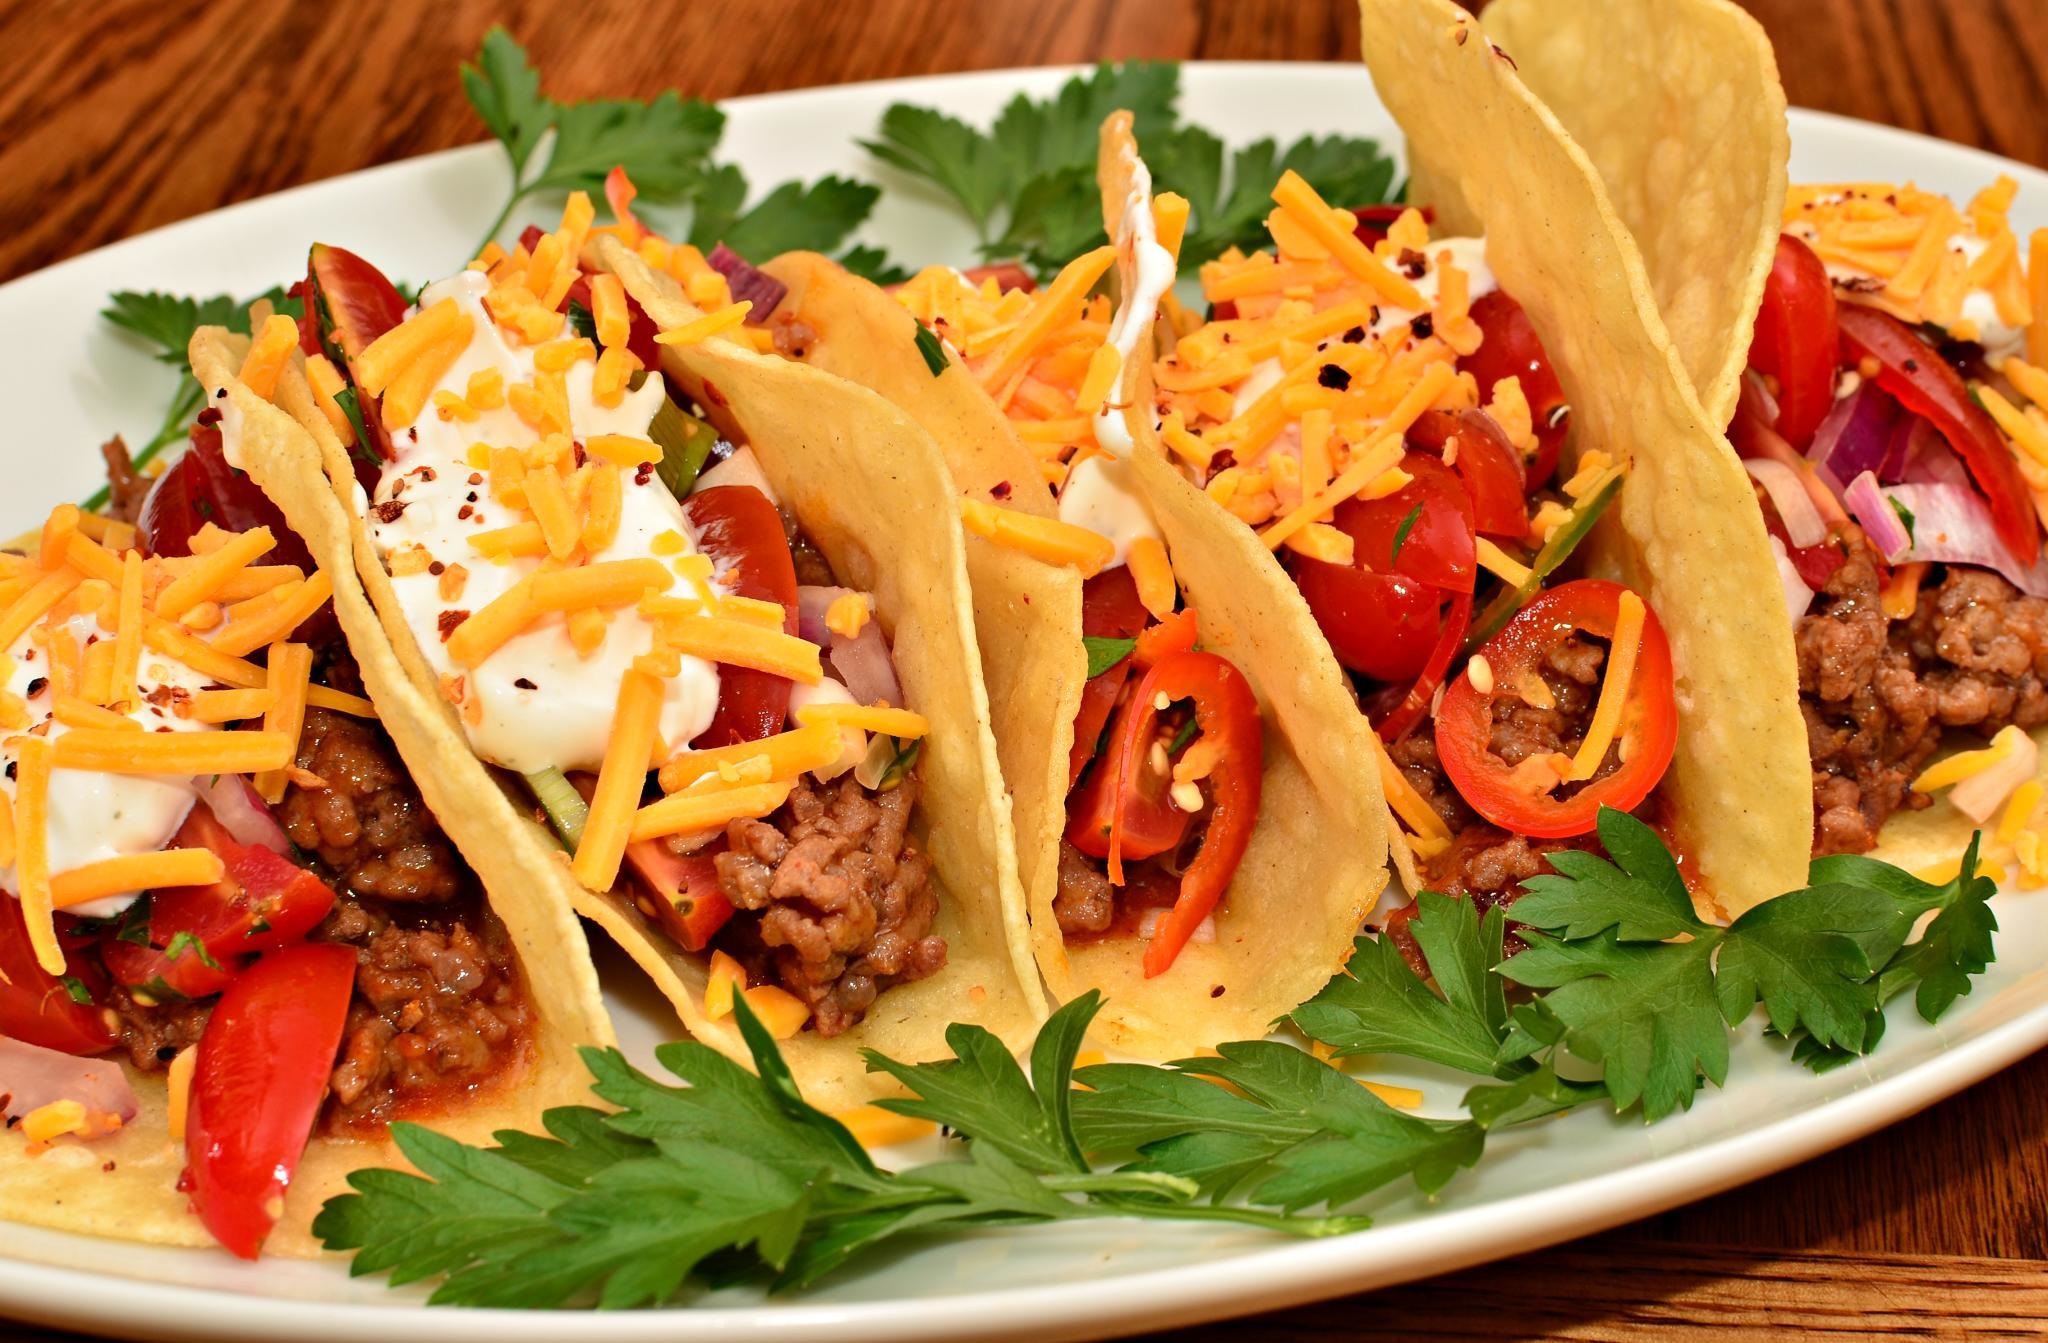 Taco Time? Why You Might have to Reschedule Taco Tuesday